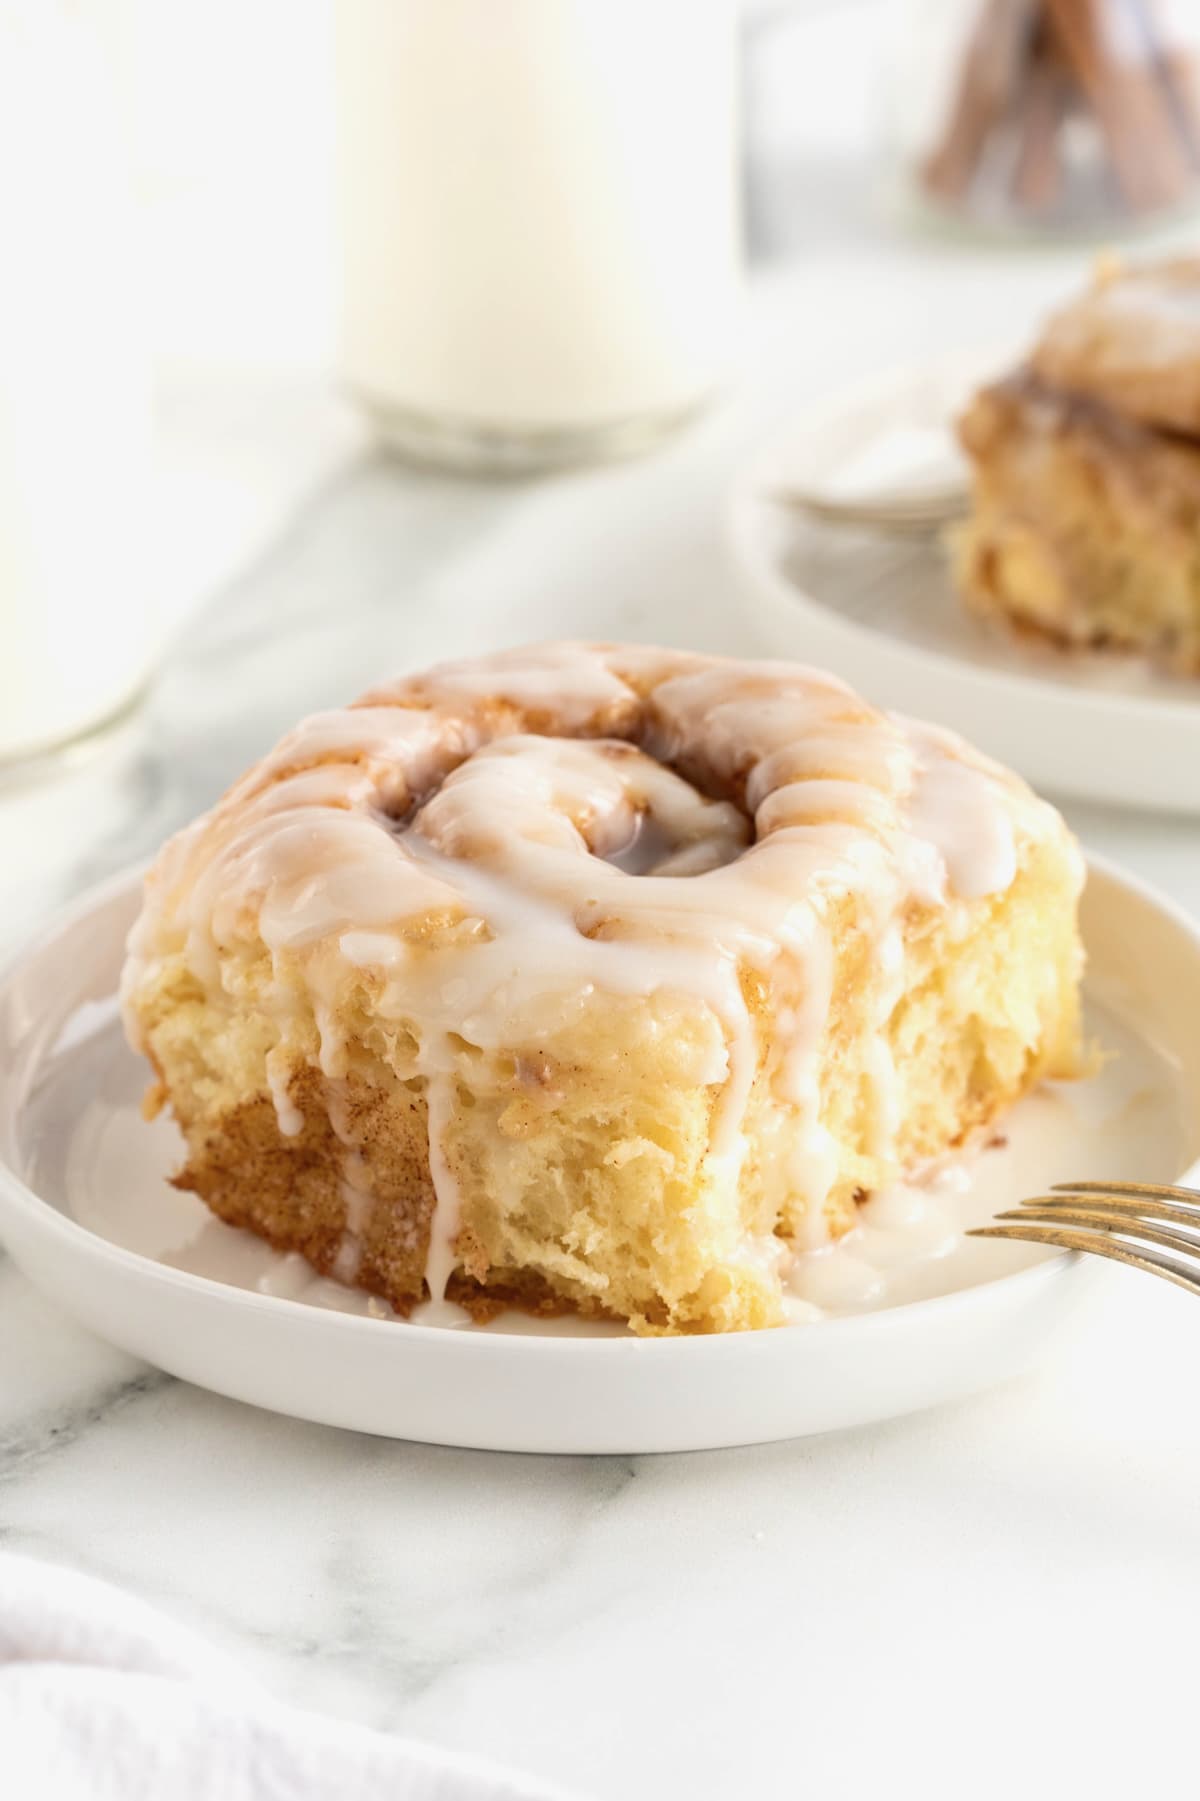 A homemade cinnamon roll on a small rimmed white plate.